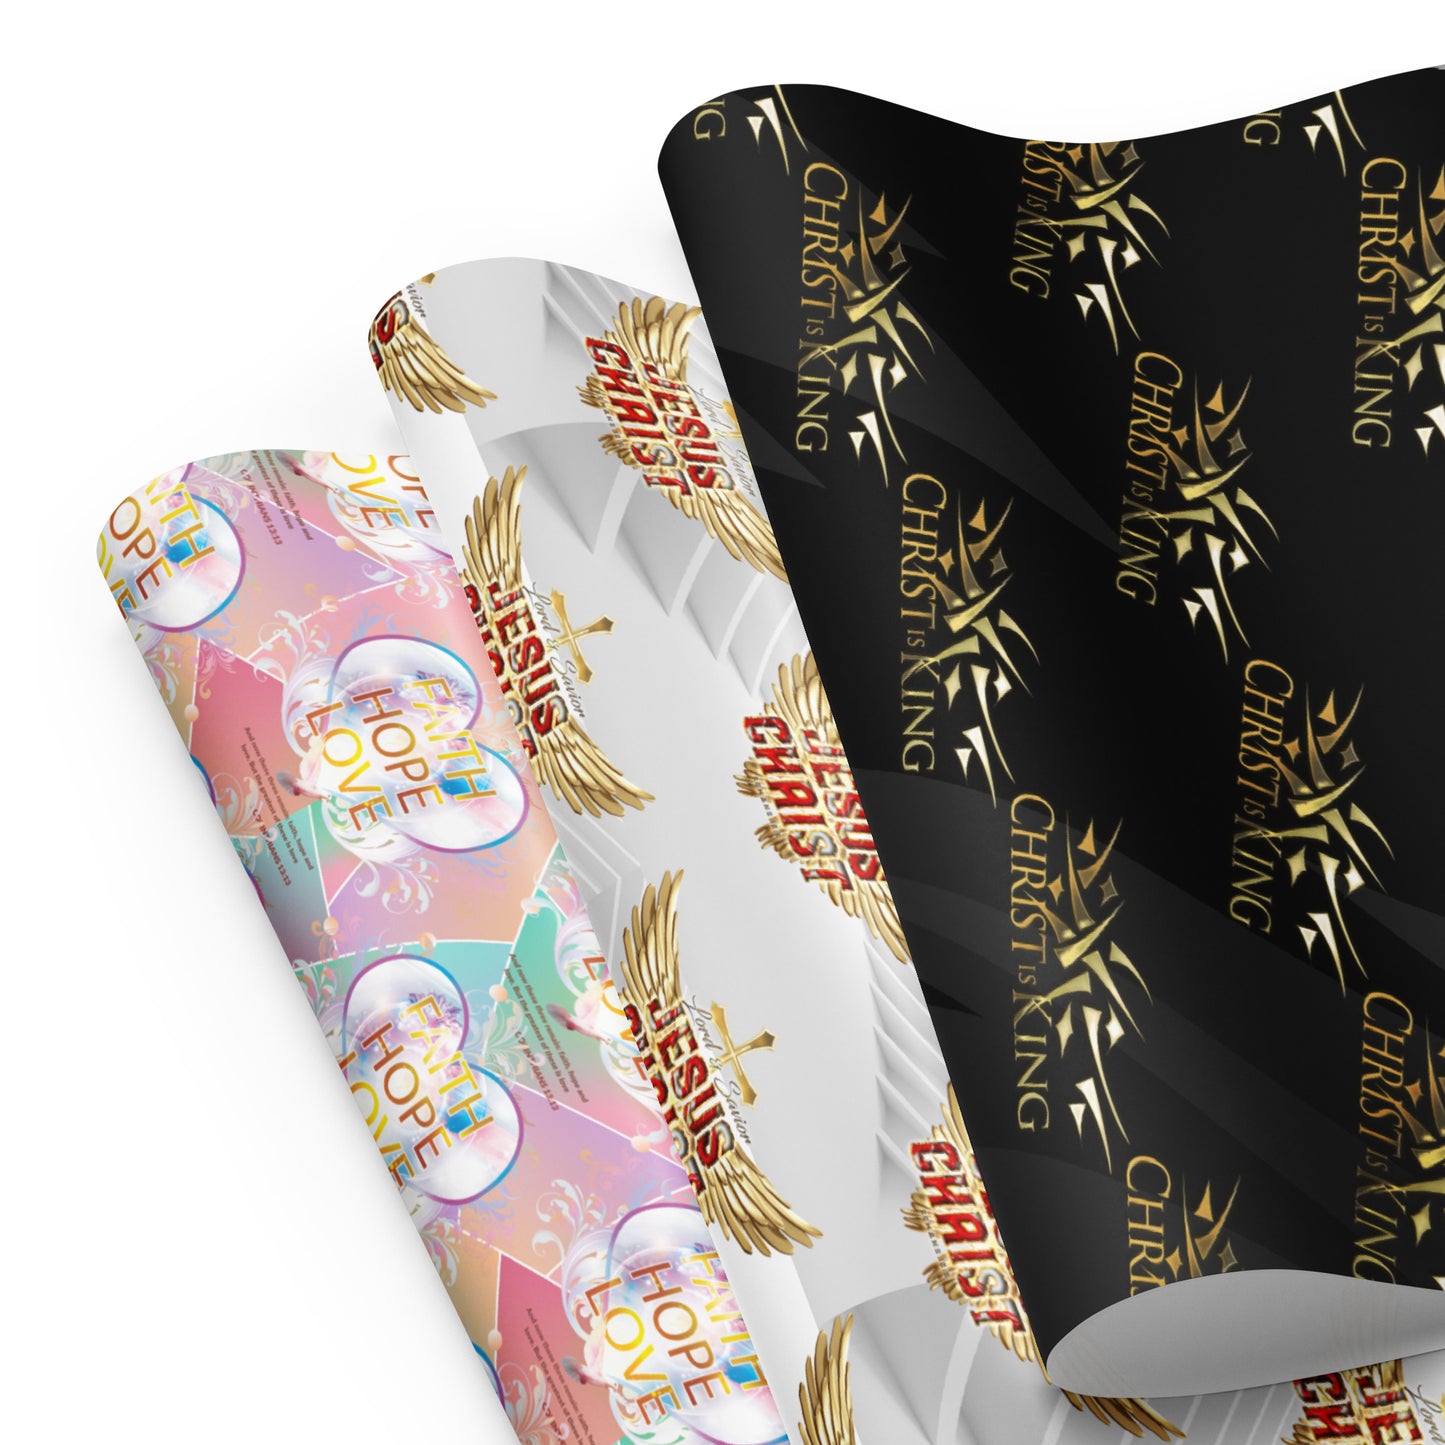 Wrapping paper sheets  (Christ is King, Faith, Hope & Love